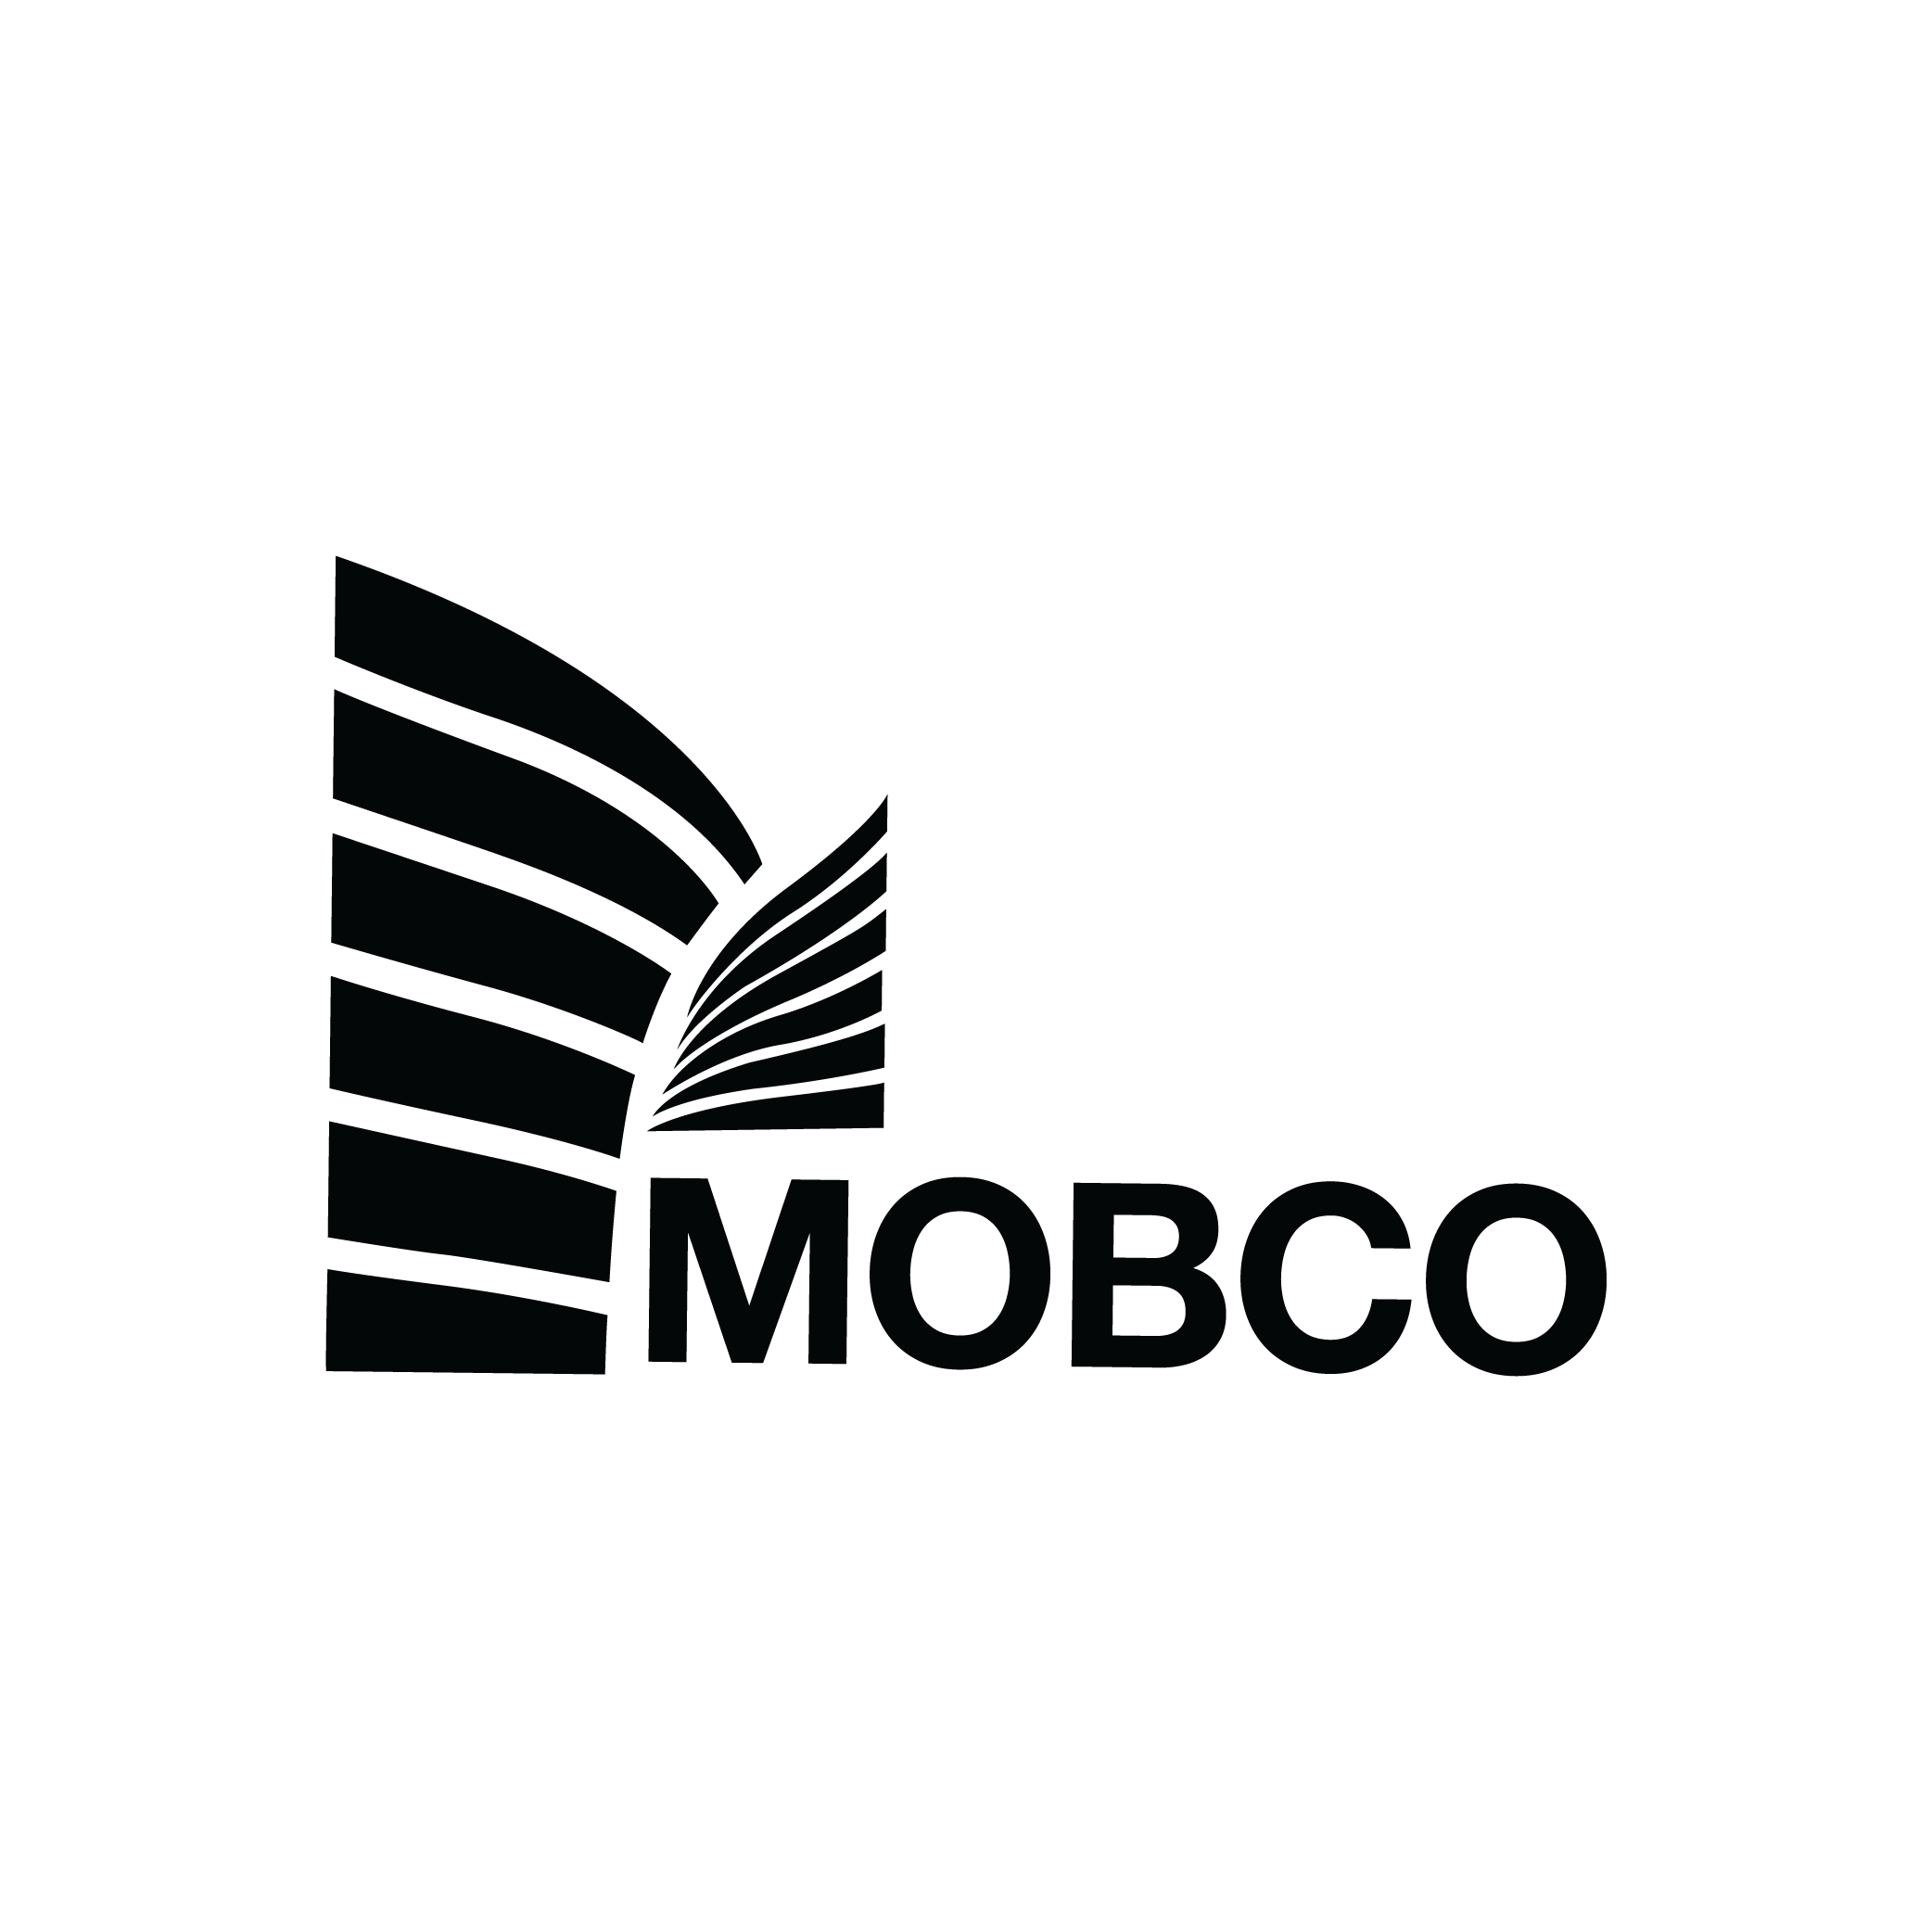 MOBCO.png